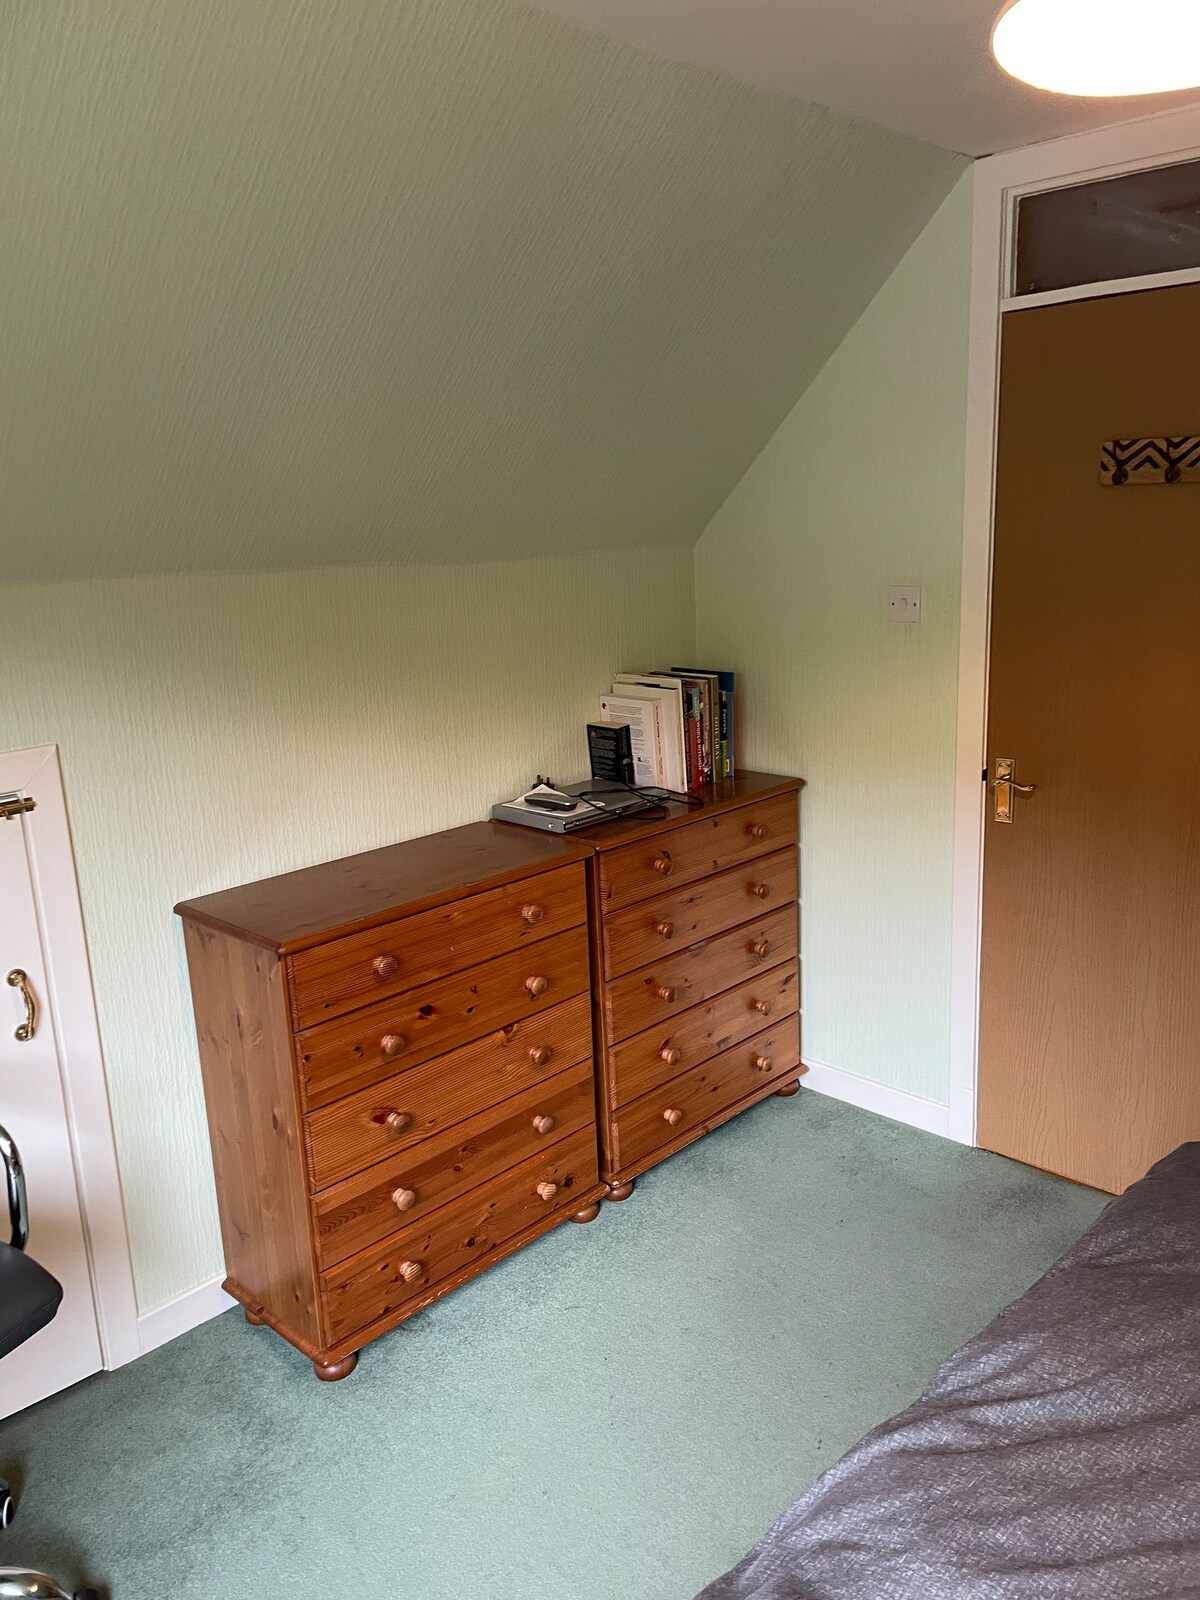 Room for up to 3 guests in shared home, Glenfarg.